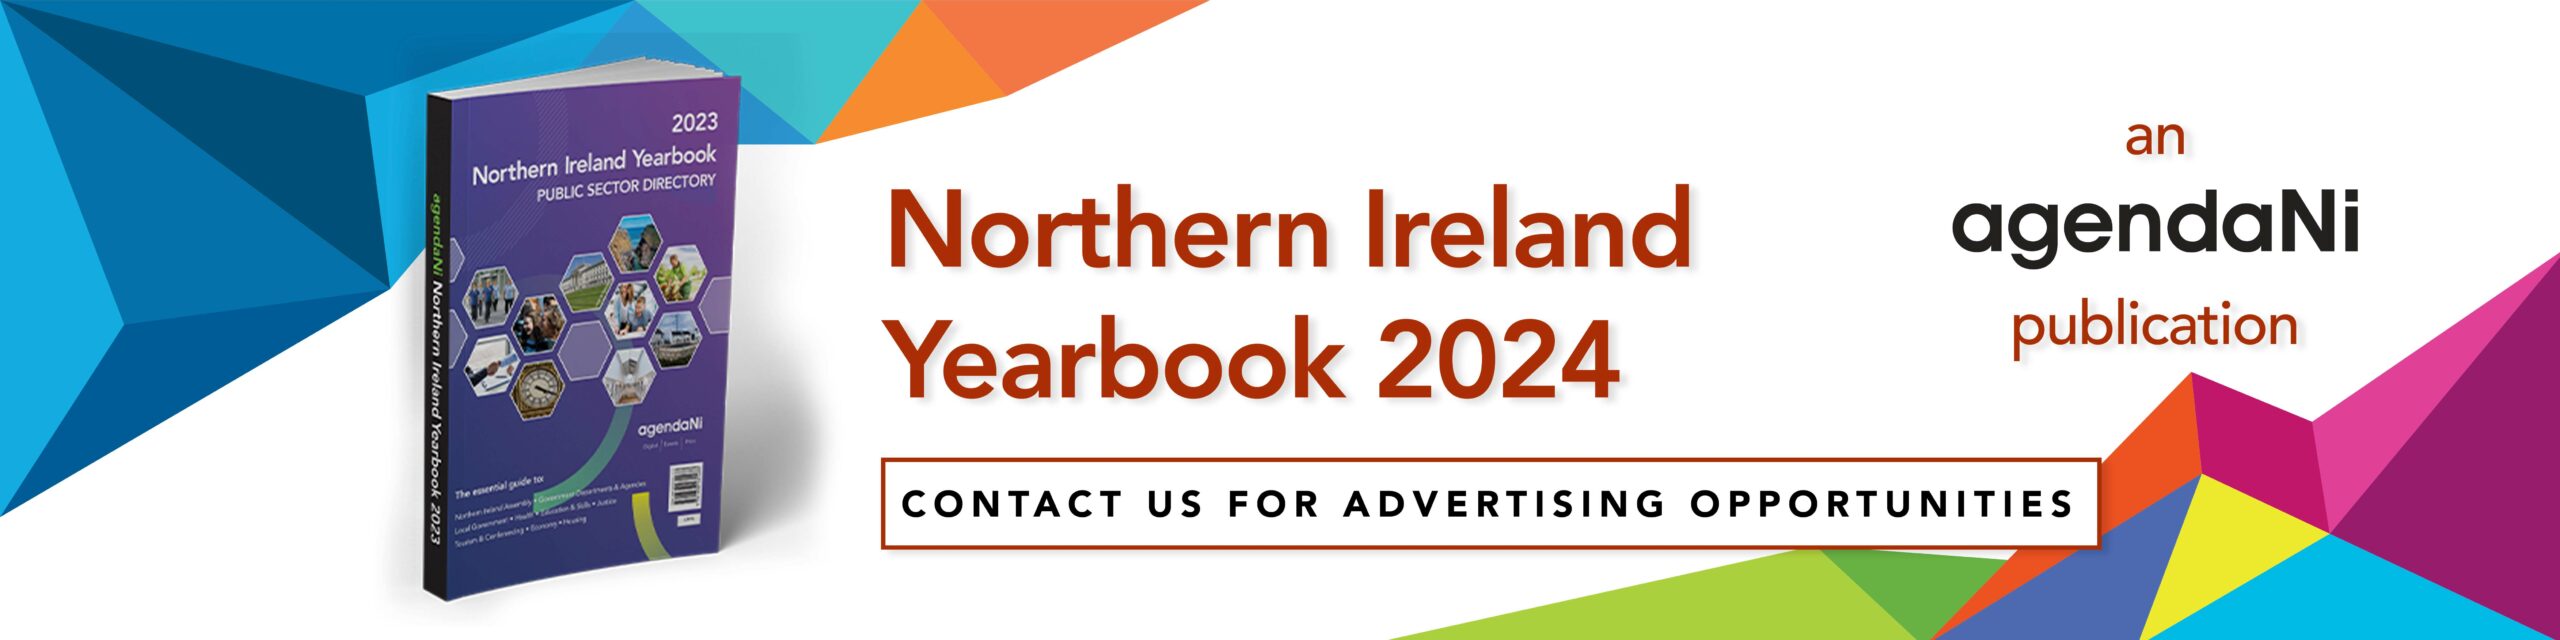 Purchase your copy of the Northern Ireland Yearbook